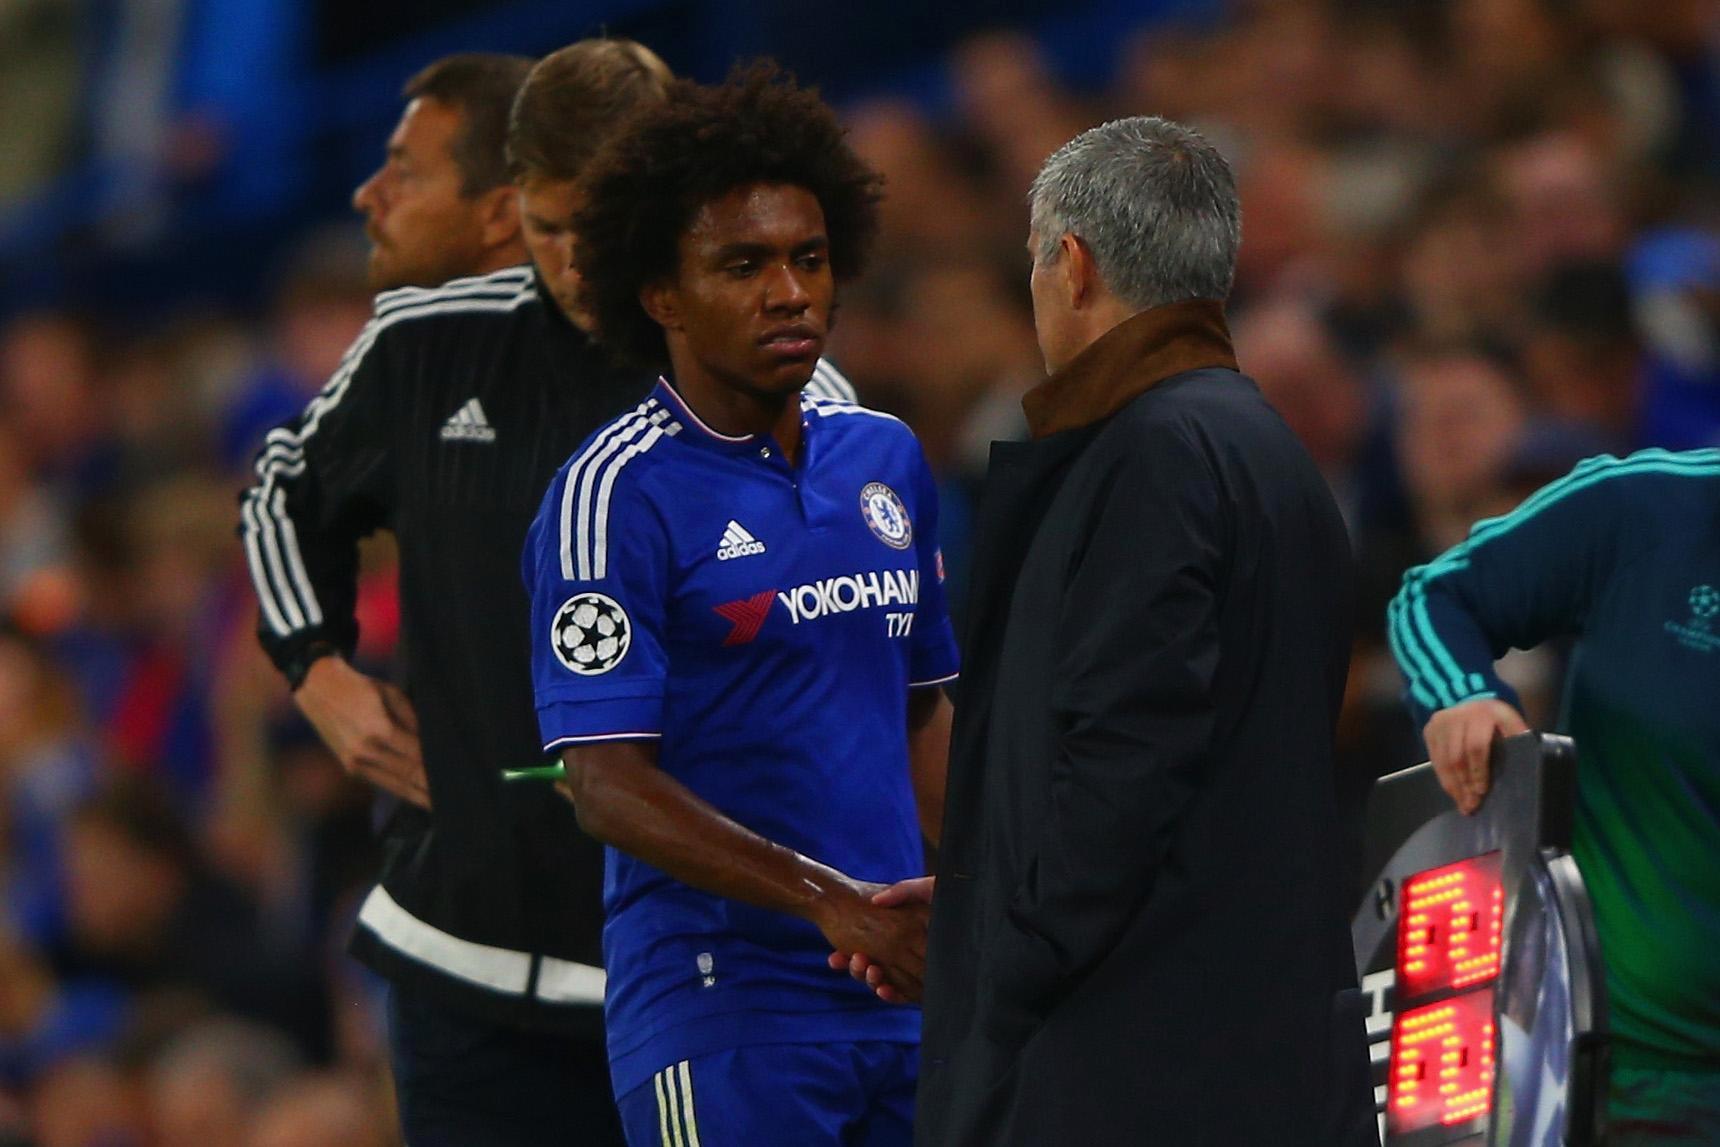 Chelsea News: Blues reportedly reject £50m Barcelona offer for star winger Willian